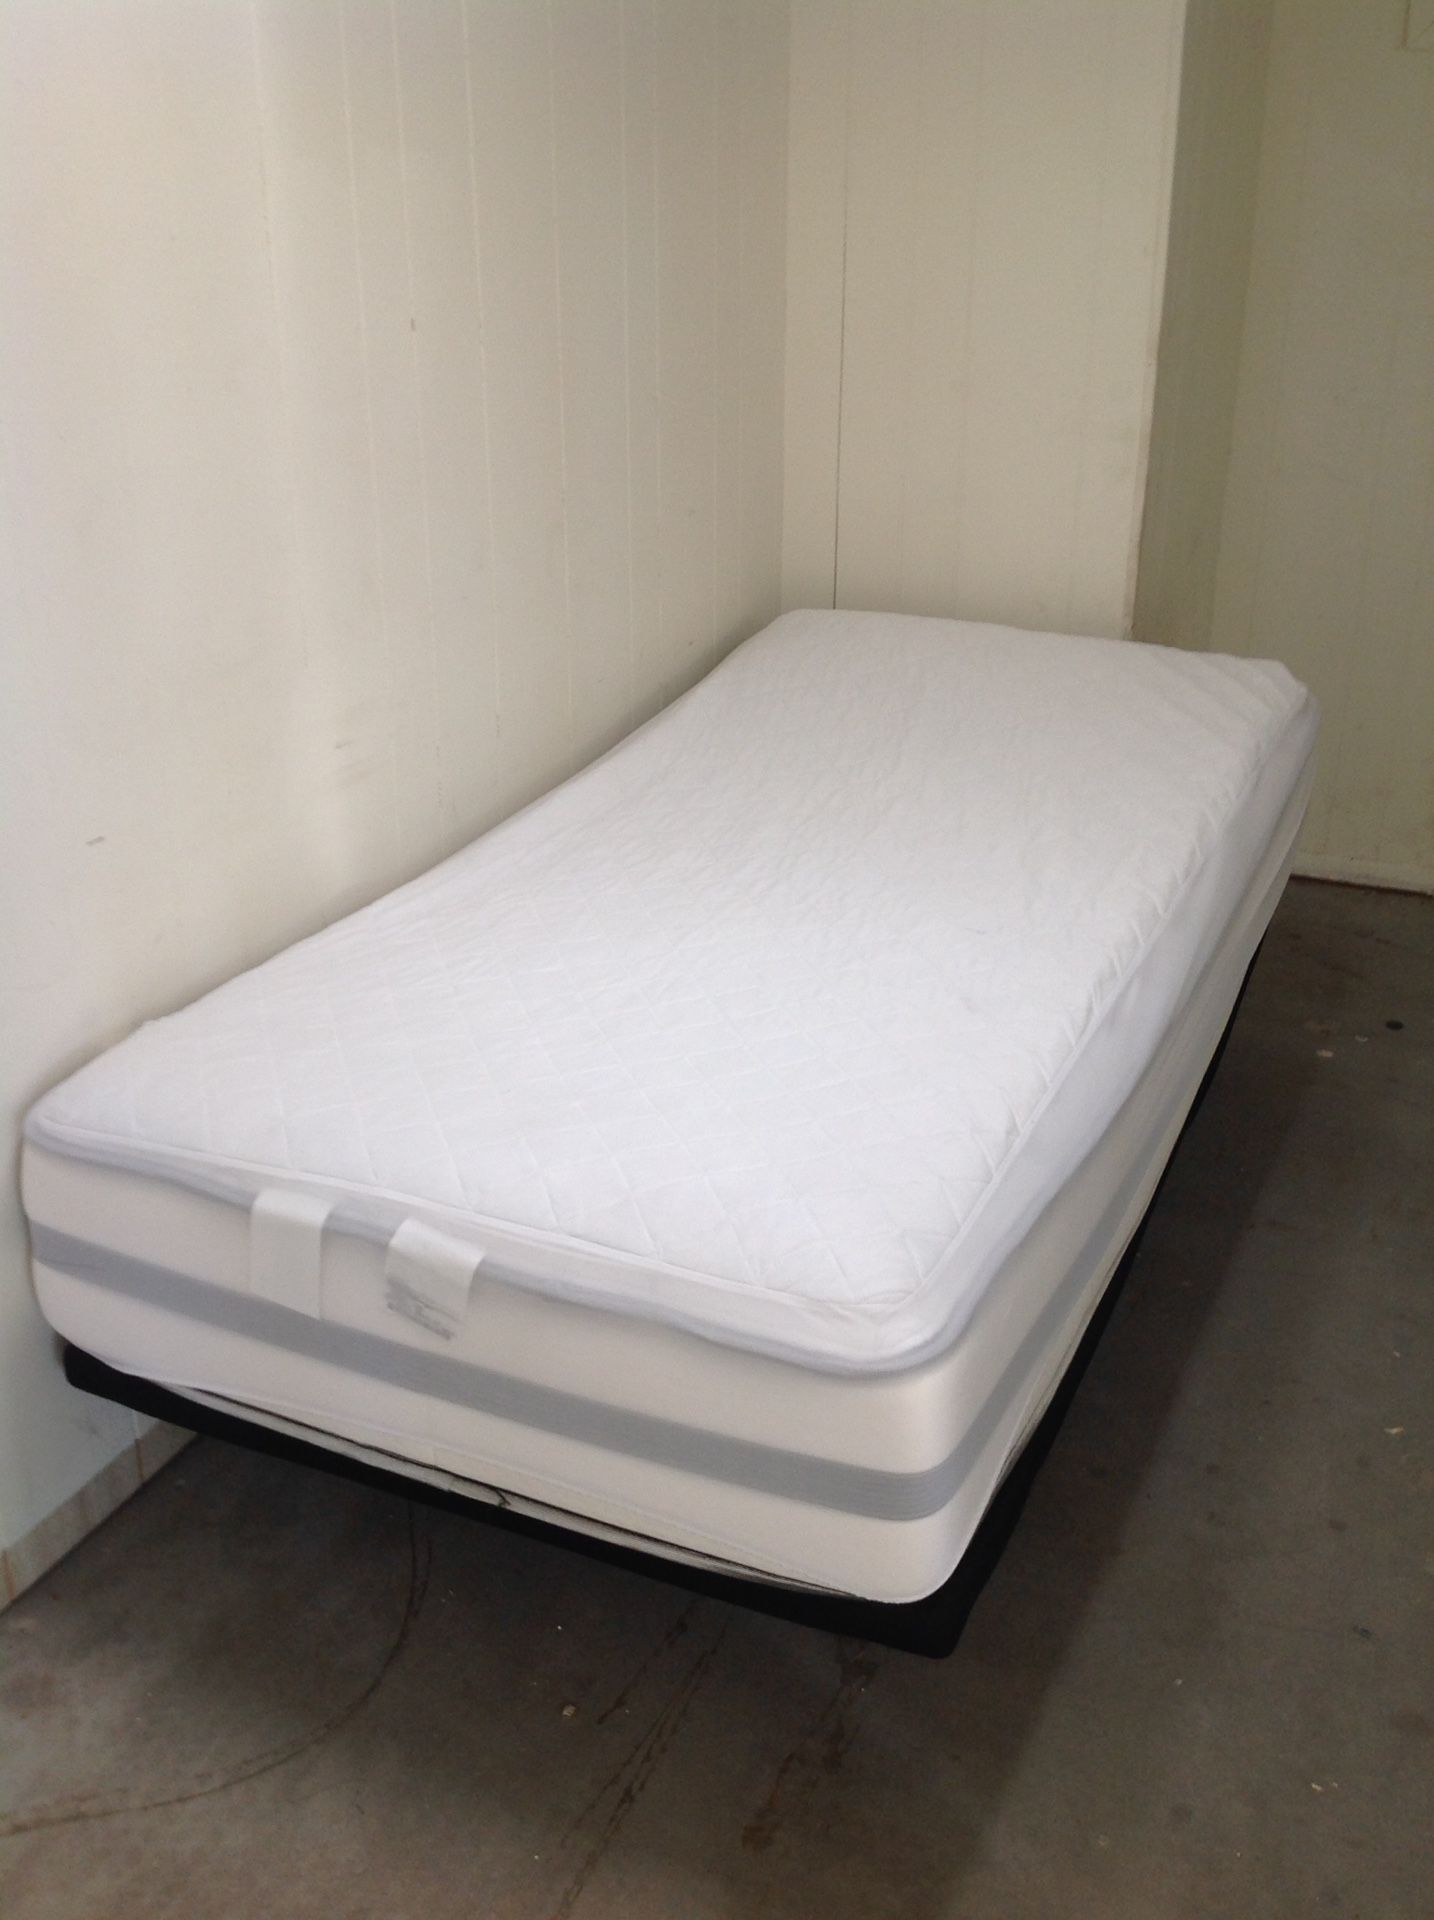 Twin Adjustable Bed with Beauty Rest Mattress, from Mattress Firm. Needs a remote to operate motor)